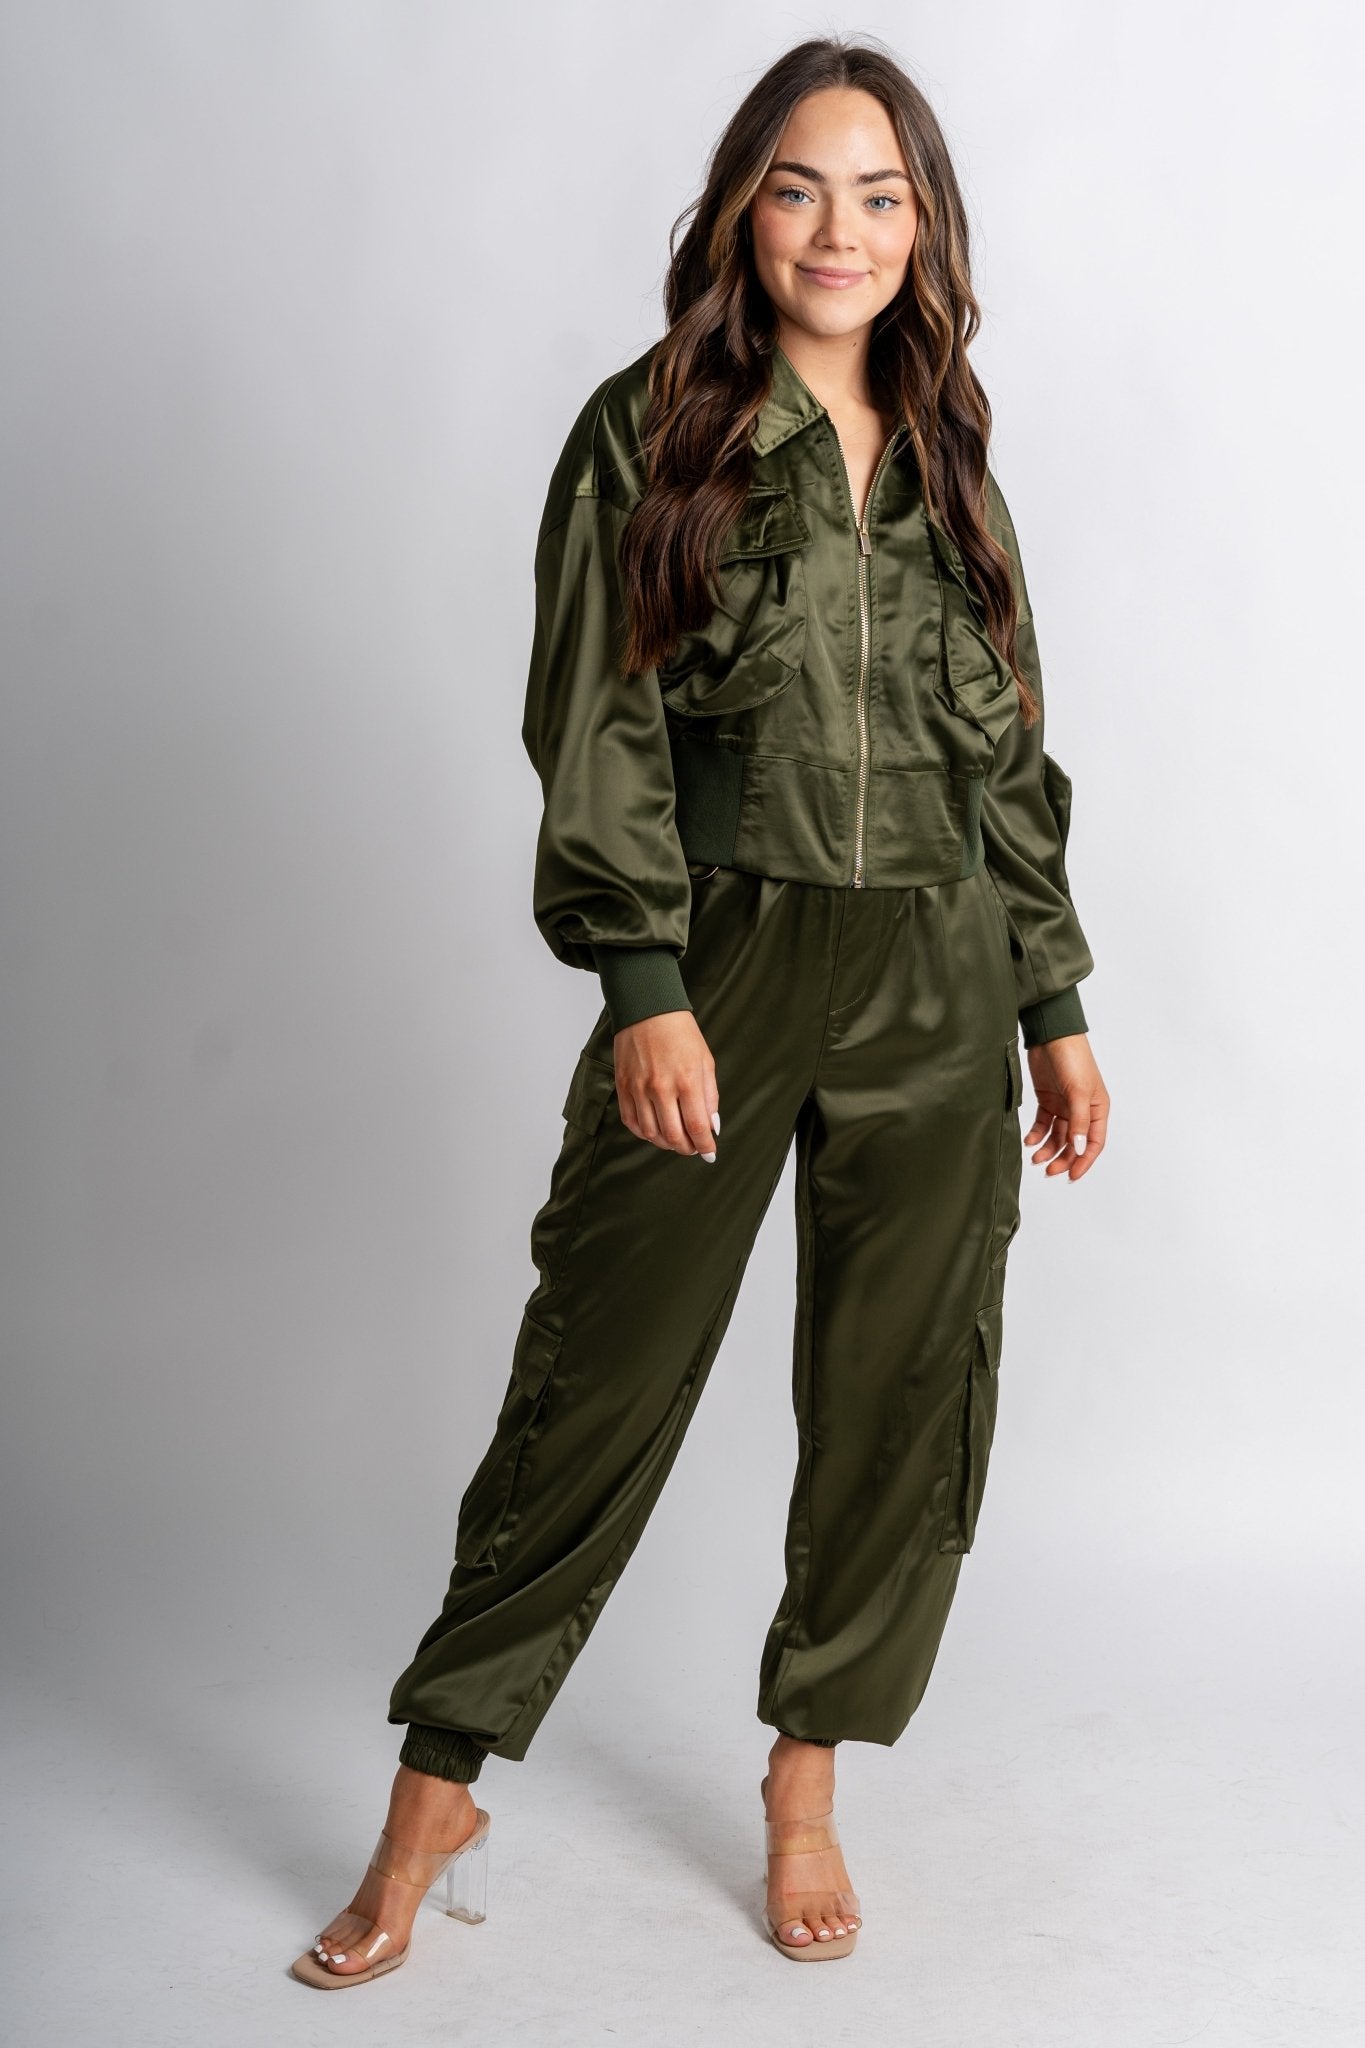 Satin cargo jacket olive – Unique Blazers | Cute Blazers For Women at Lush Fashion Lounge Boutique in Oklahoma City